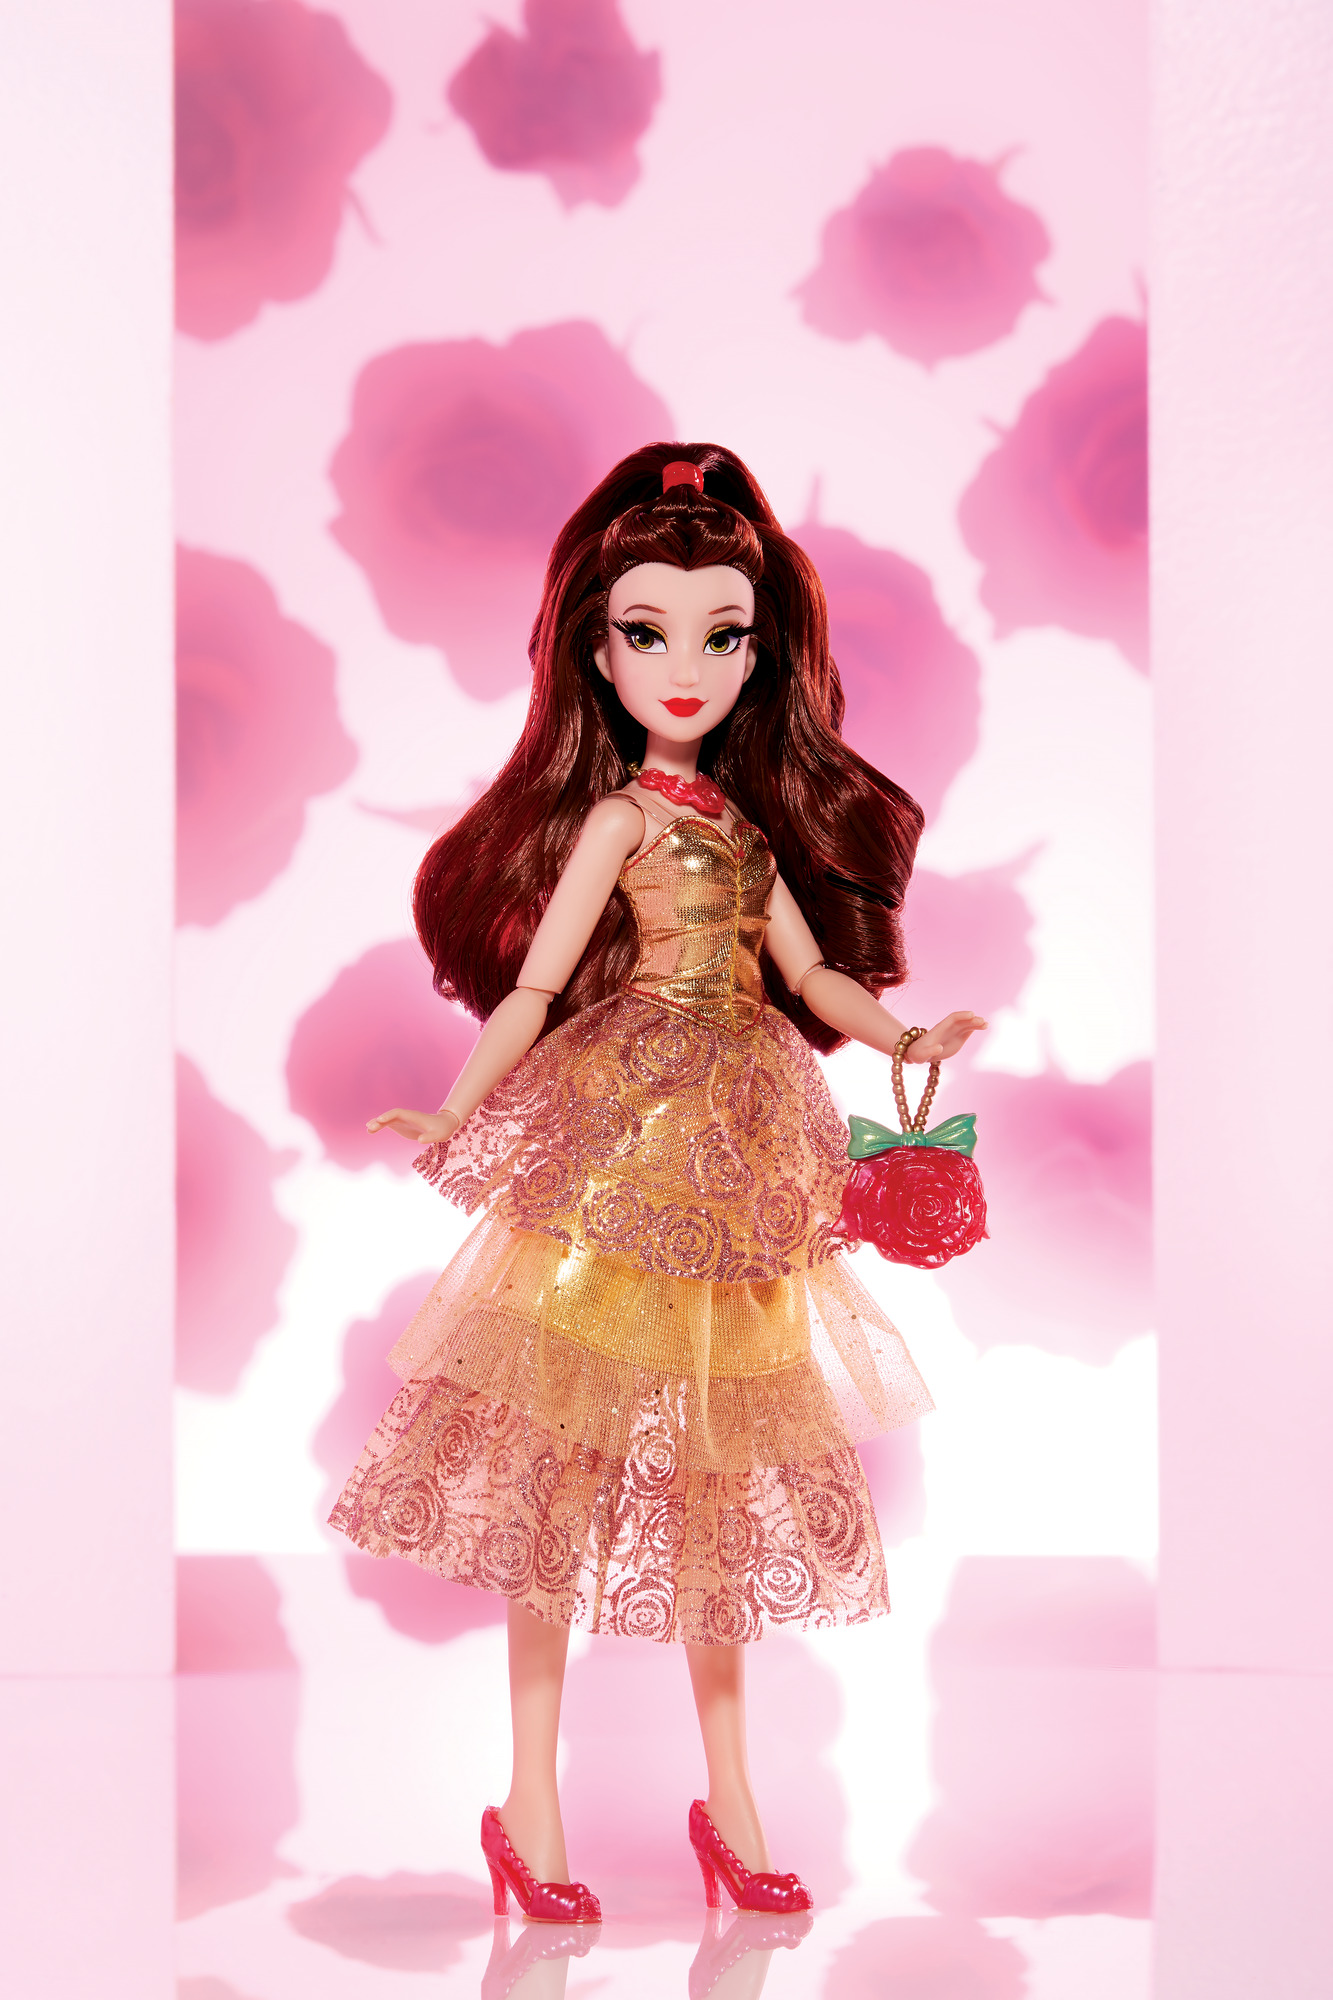 Disney Princess Style Series, Belle Fashion Doll In Contemporary Style - image 3 of 9